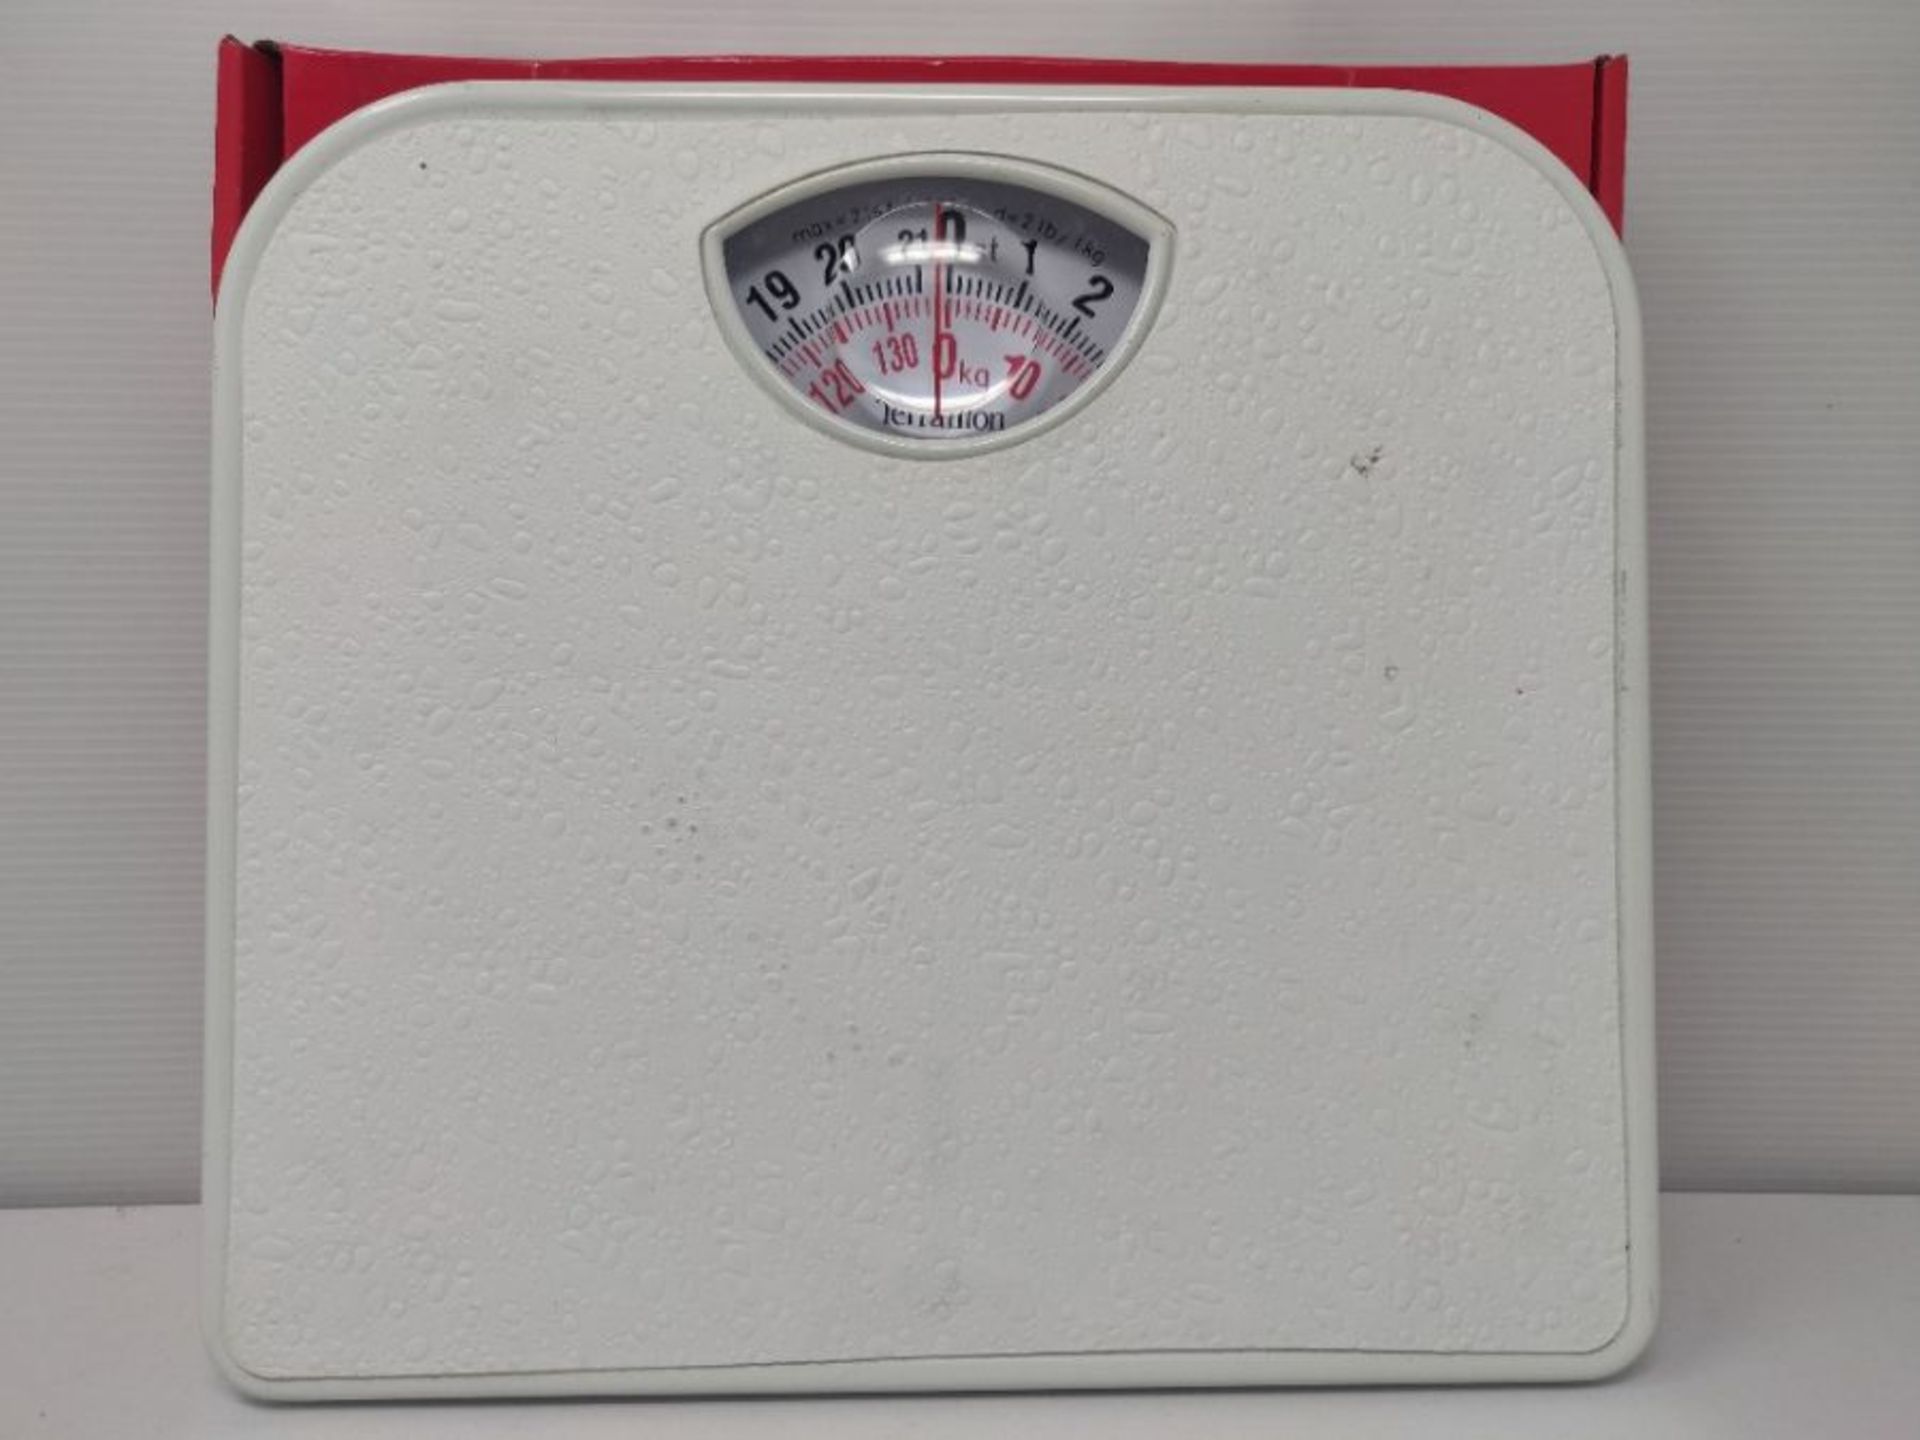 Terraillon Mechanical Bathroom Scale, Large Rotating dial, Compact, 120 kg/19 st, T101 - Image 2 of 2